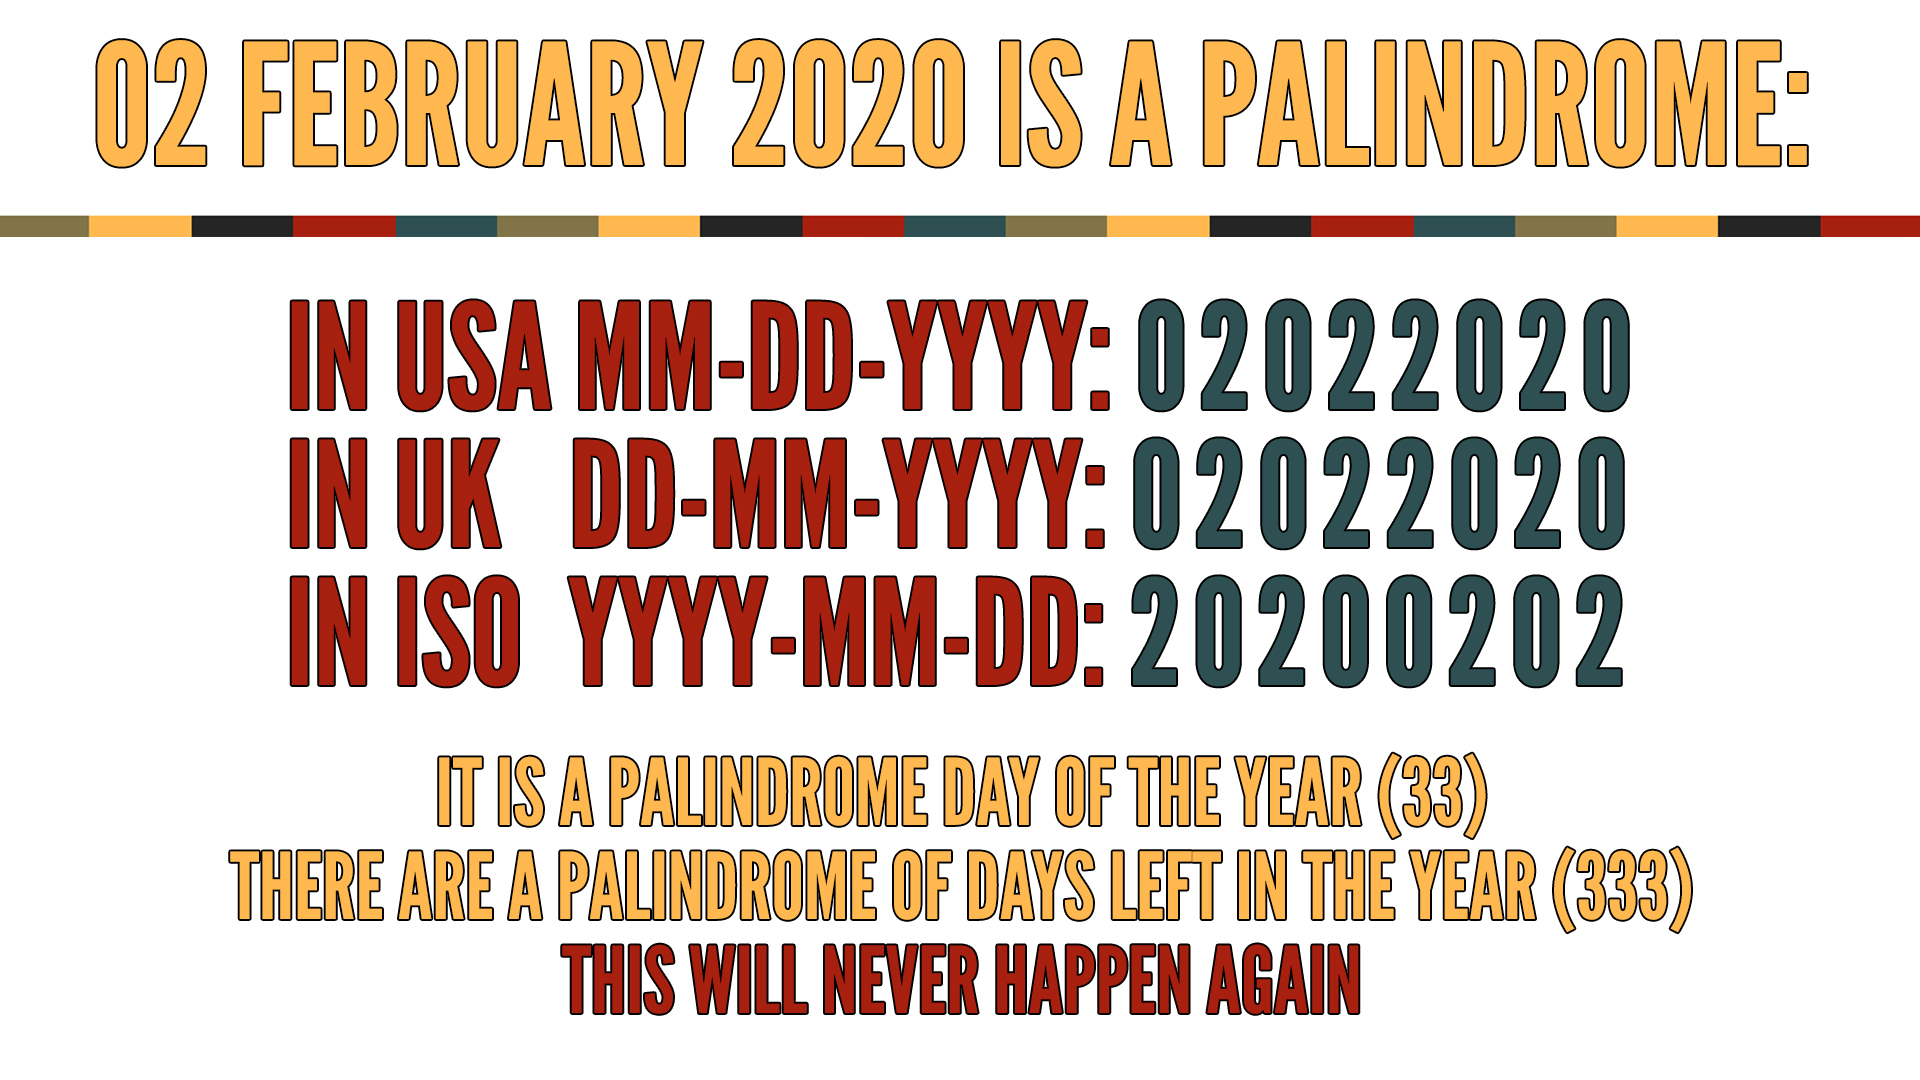 First Global Palindrome Day In 909 years on 02/02/2020 in 909 Years